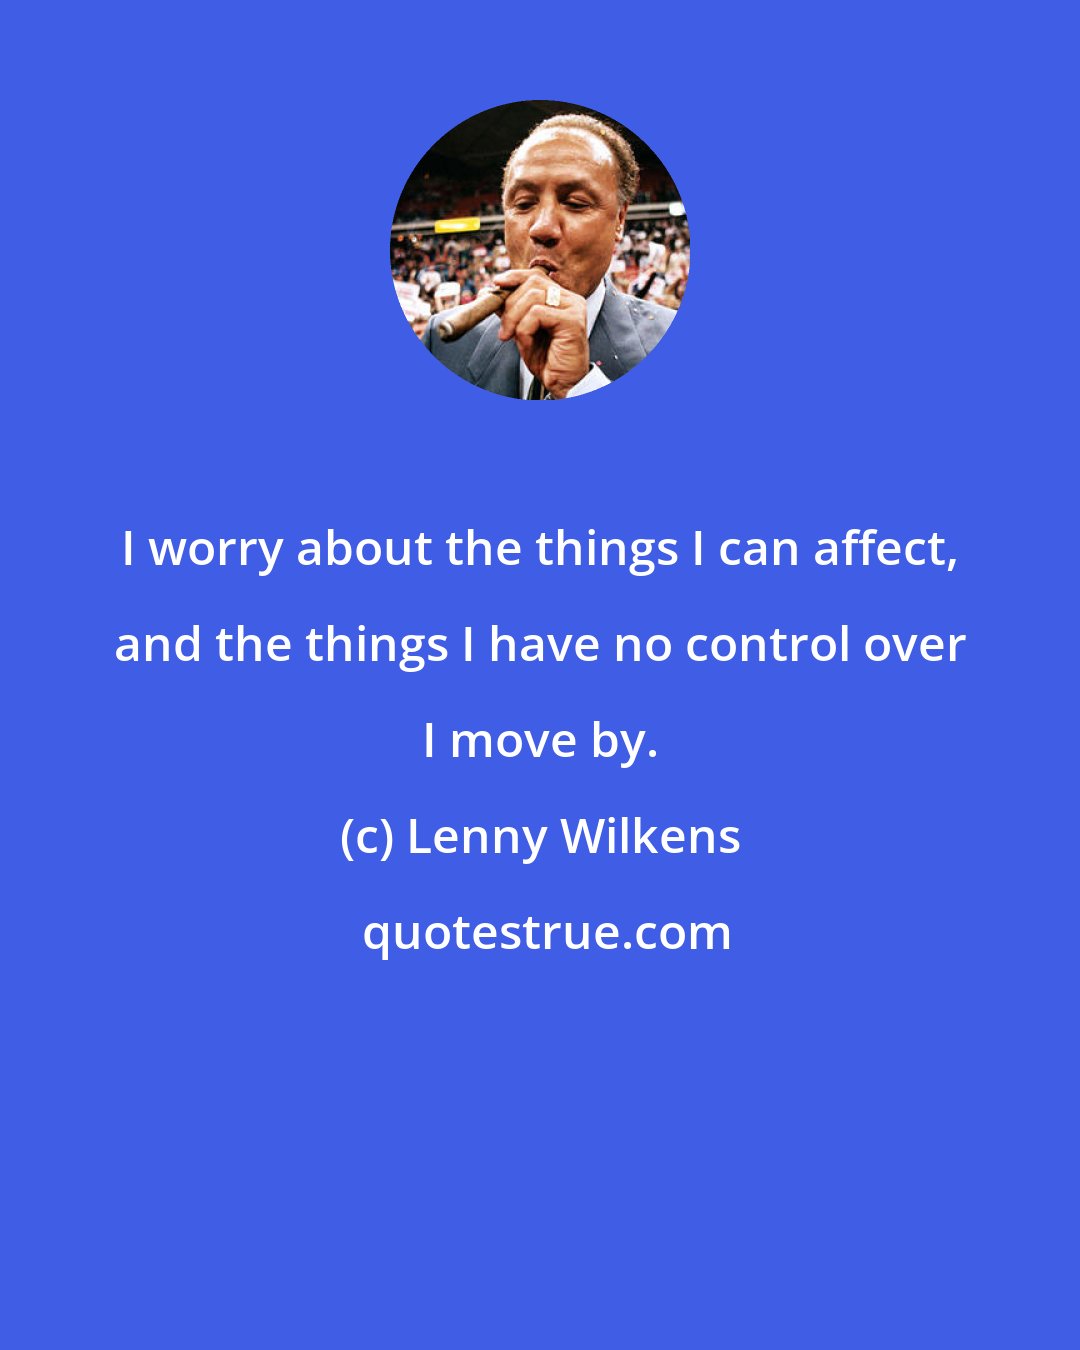 Lenny Wilkens: I worry about the things I can affect, and the things I have no control over I move by.